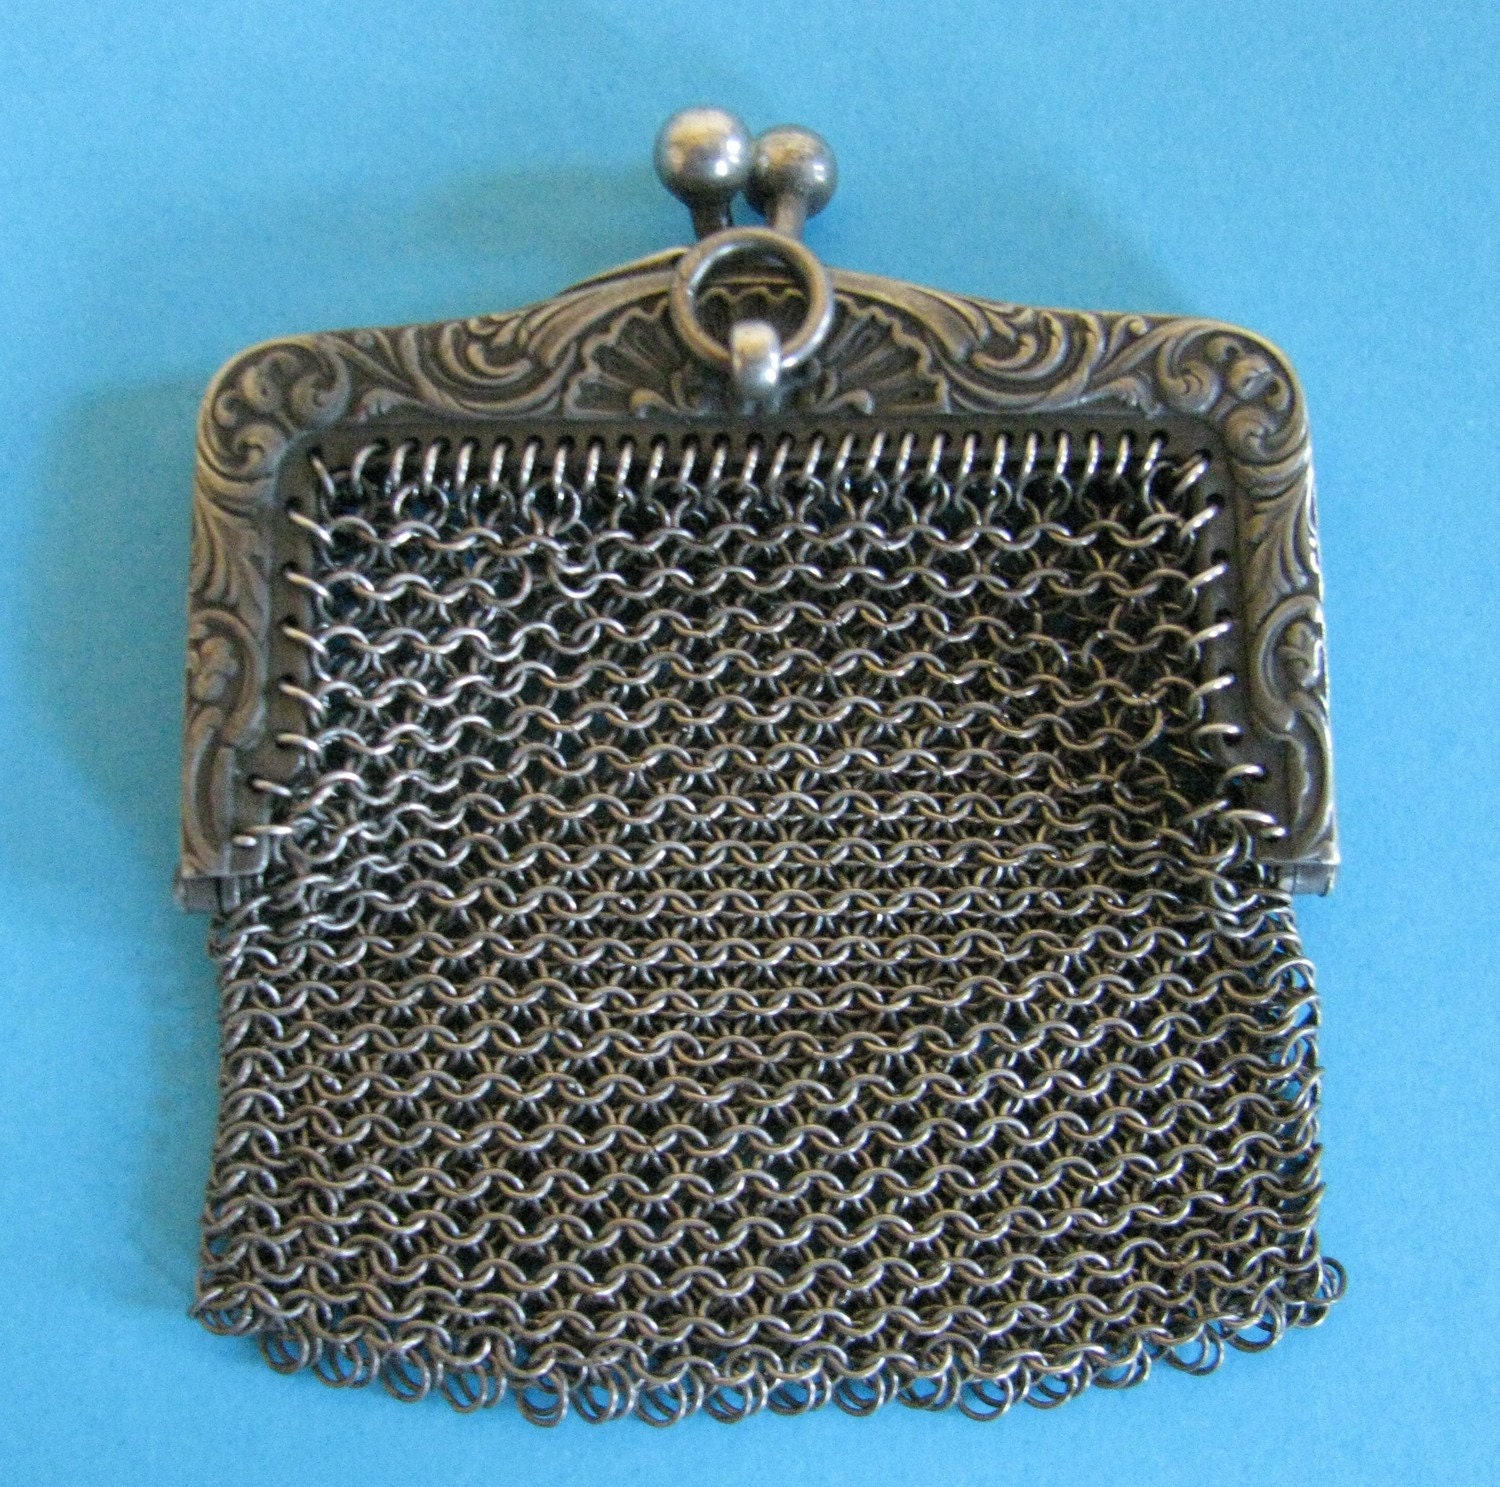 ANTIQUE silver CHAIN mail PURSE pendant by ANTIQUEfromFRANCE